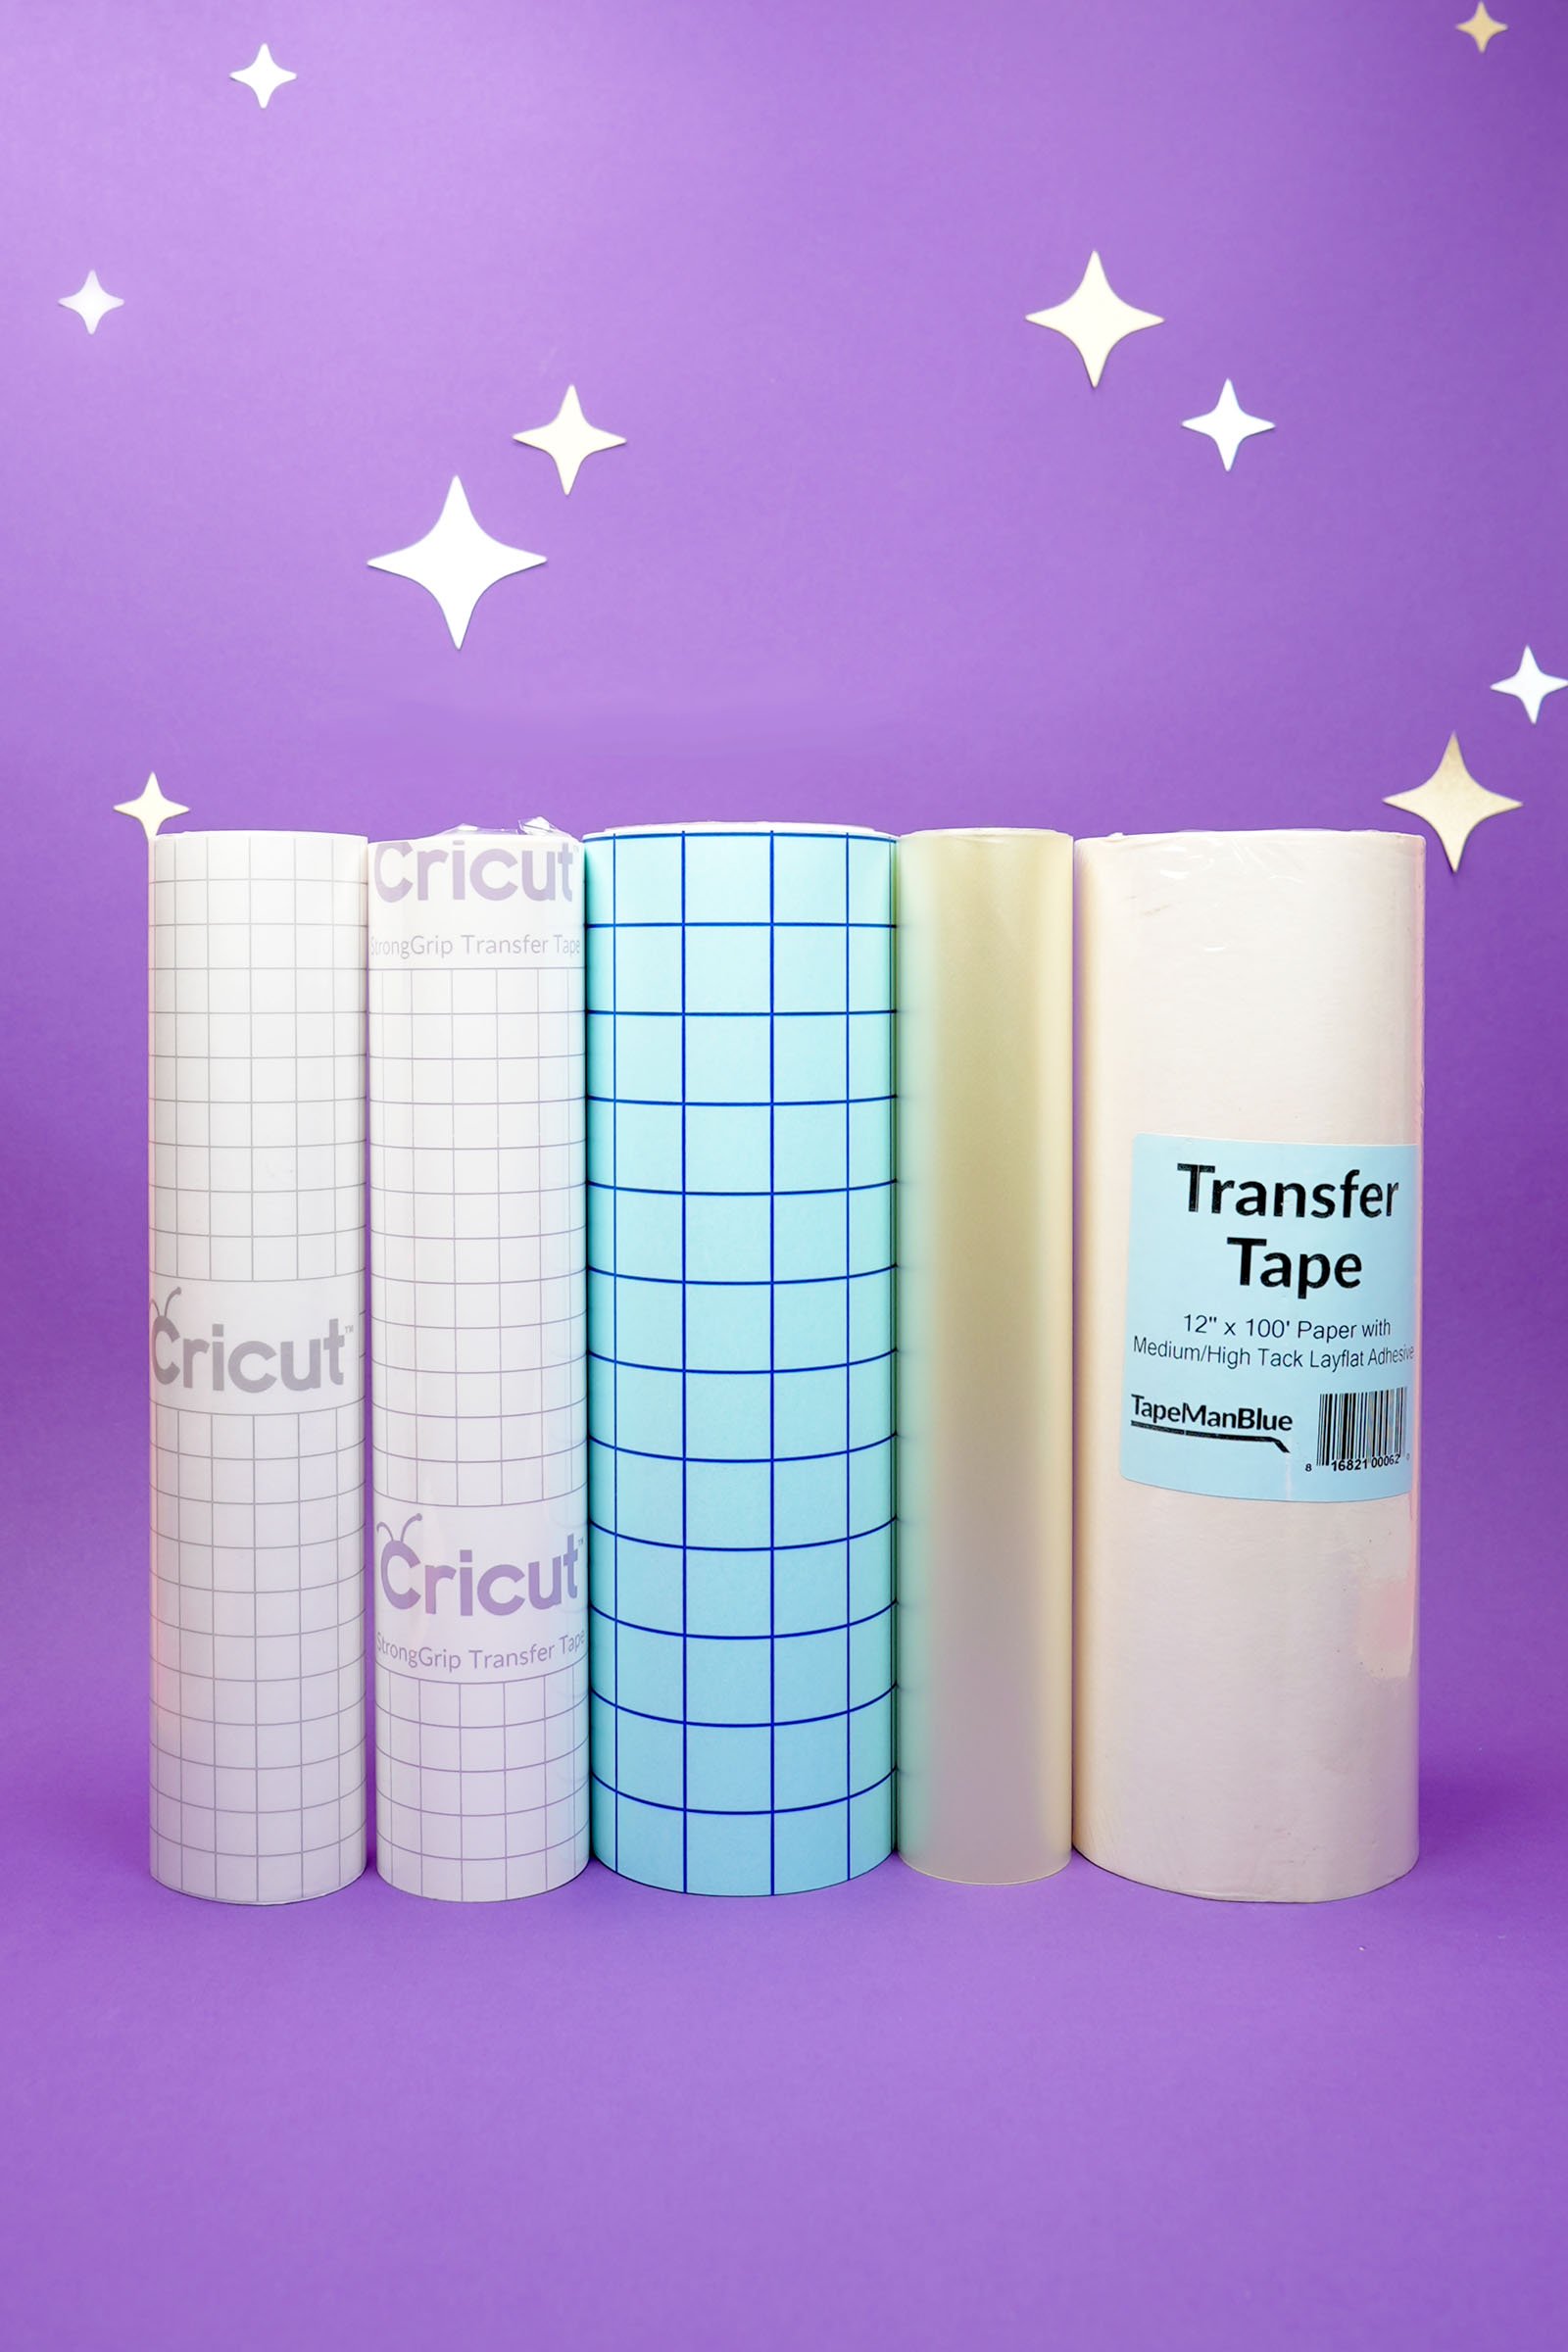 Five different types of vinyl transfer tape on rolls on a purple background